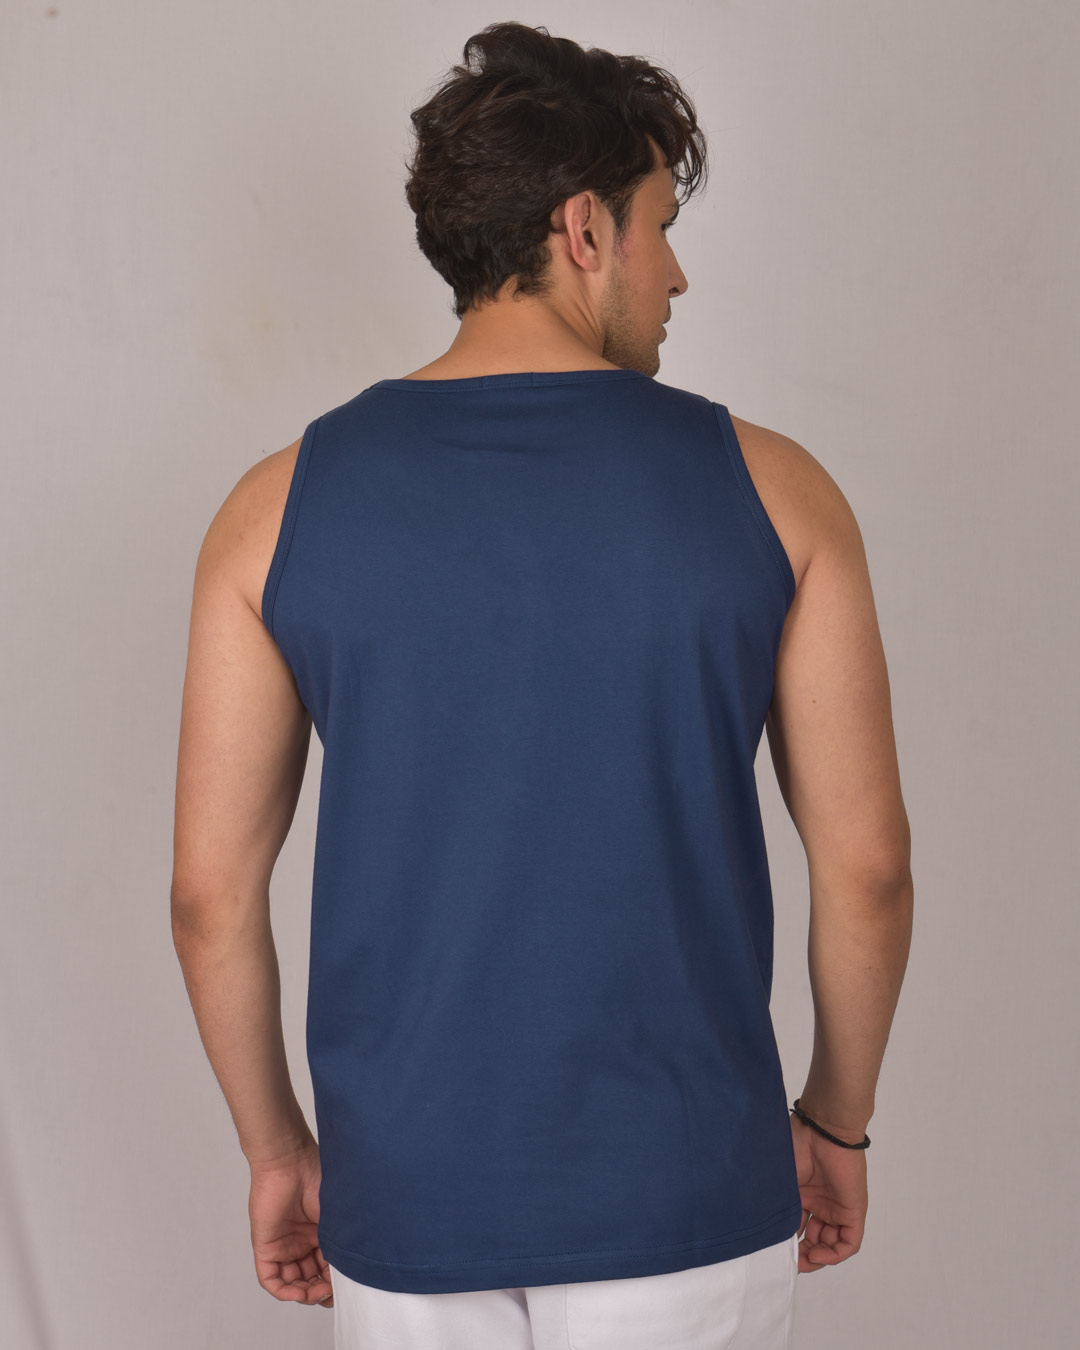 Shop The Best Therapy Vest-Back